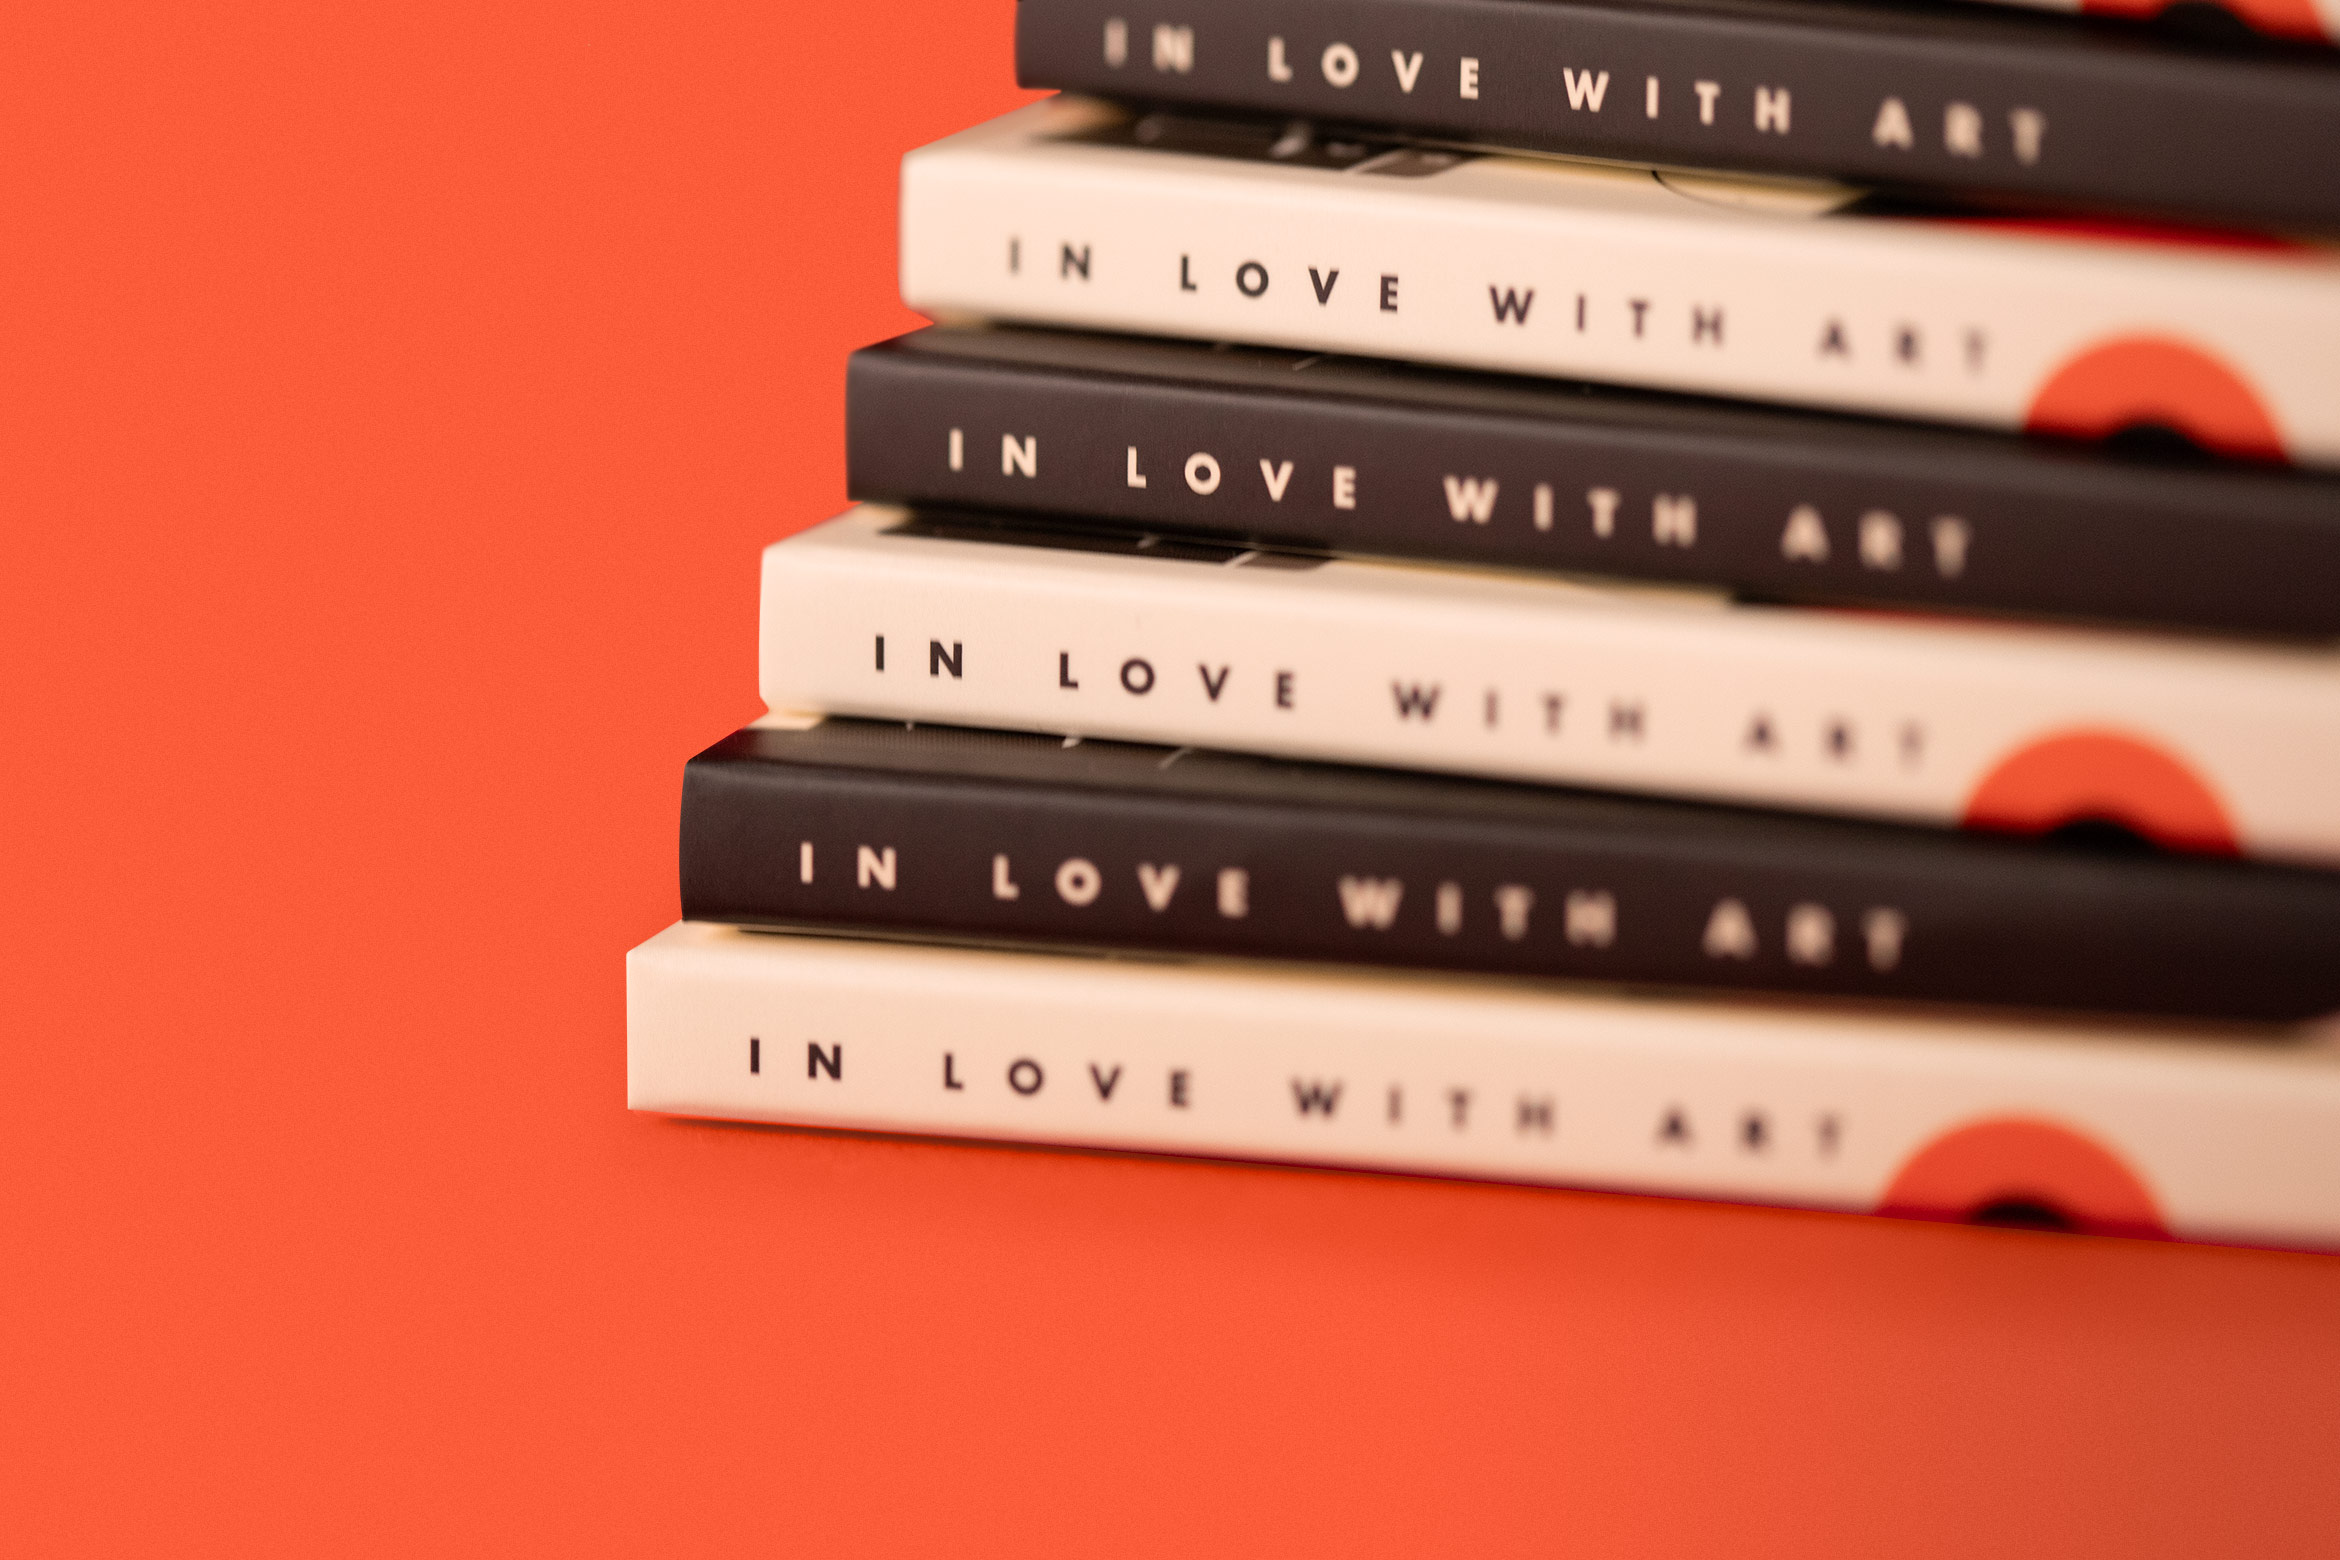 close up of spines from DAR chocolate packaging that says "in love with art"